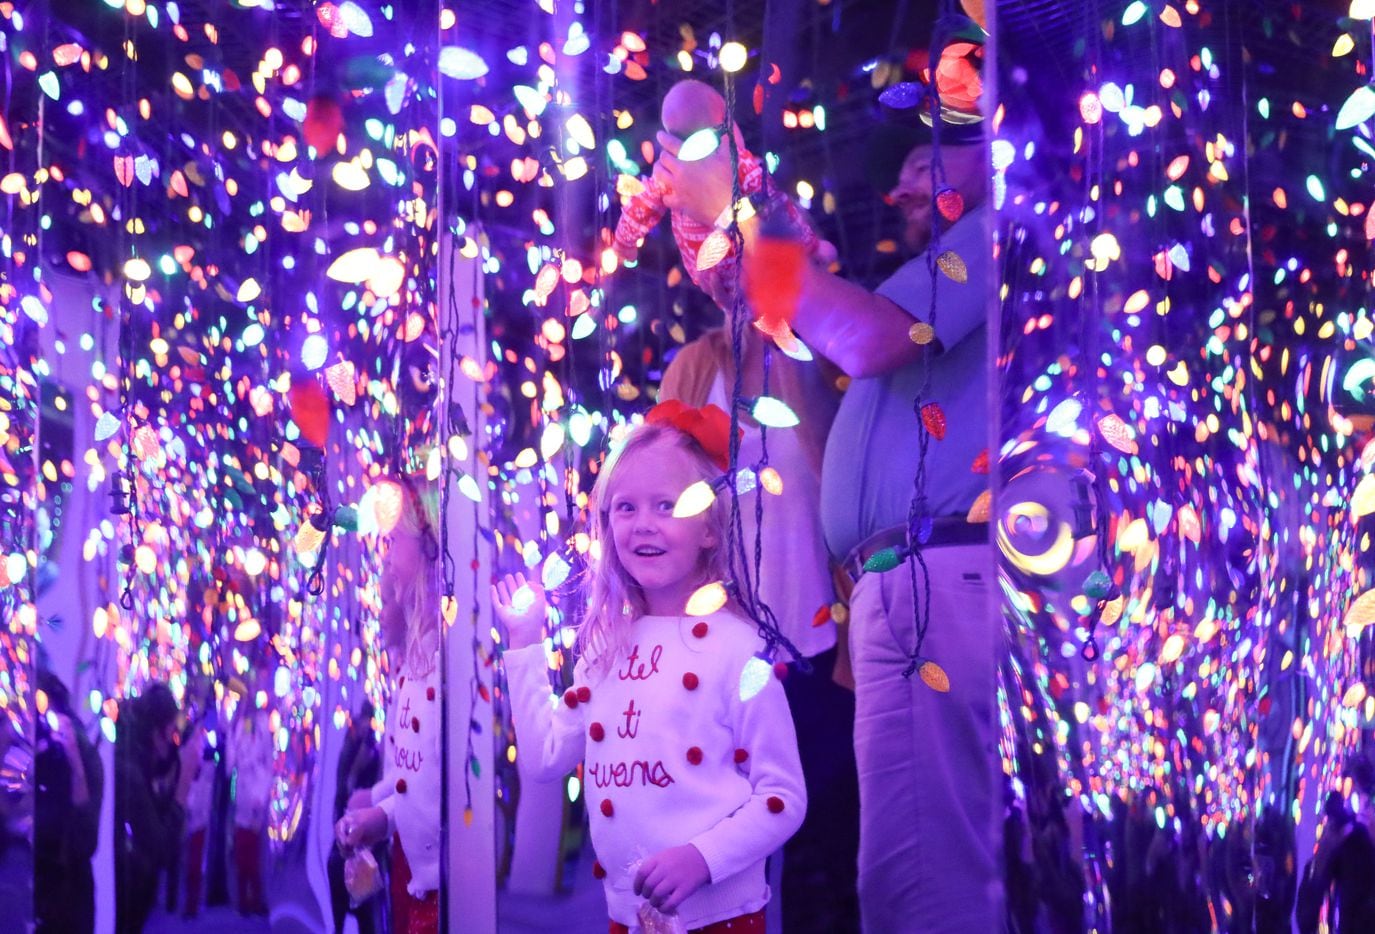 Galleria Dallas has Snowday Dallas, a holiday-themed, multiroom immersive photo experience, where families can play and pose.